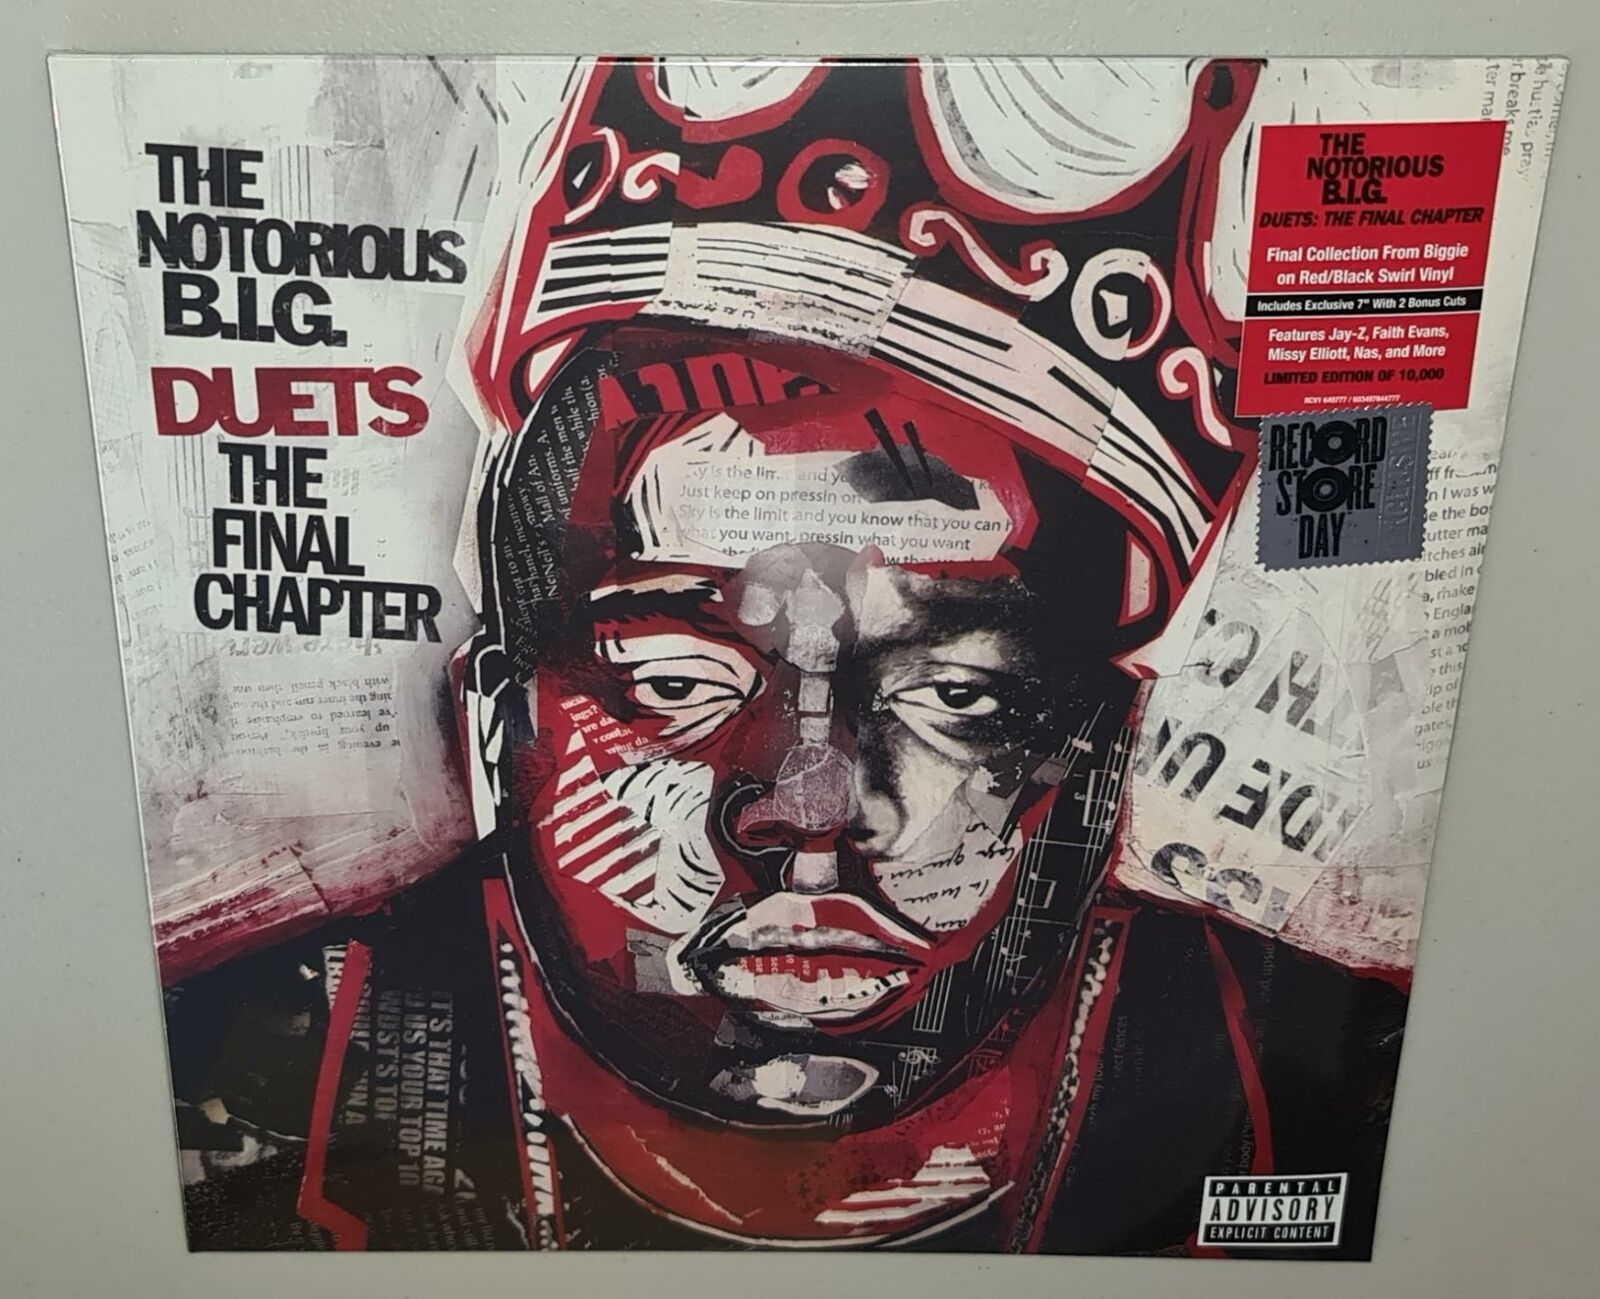 NOTORIOUS BIG DUETS THE FINAL CHAPTER (2021 RSD) BRAND NEW SEALED VINYL LP B.I.G